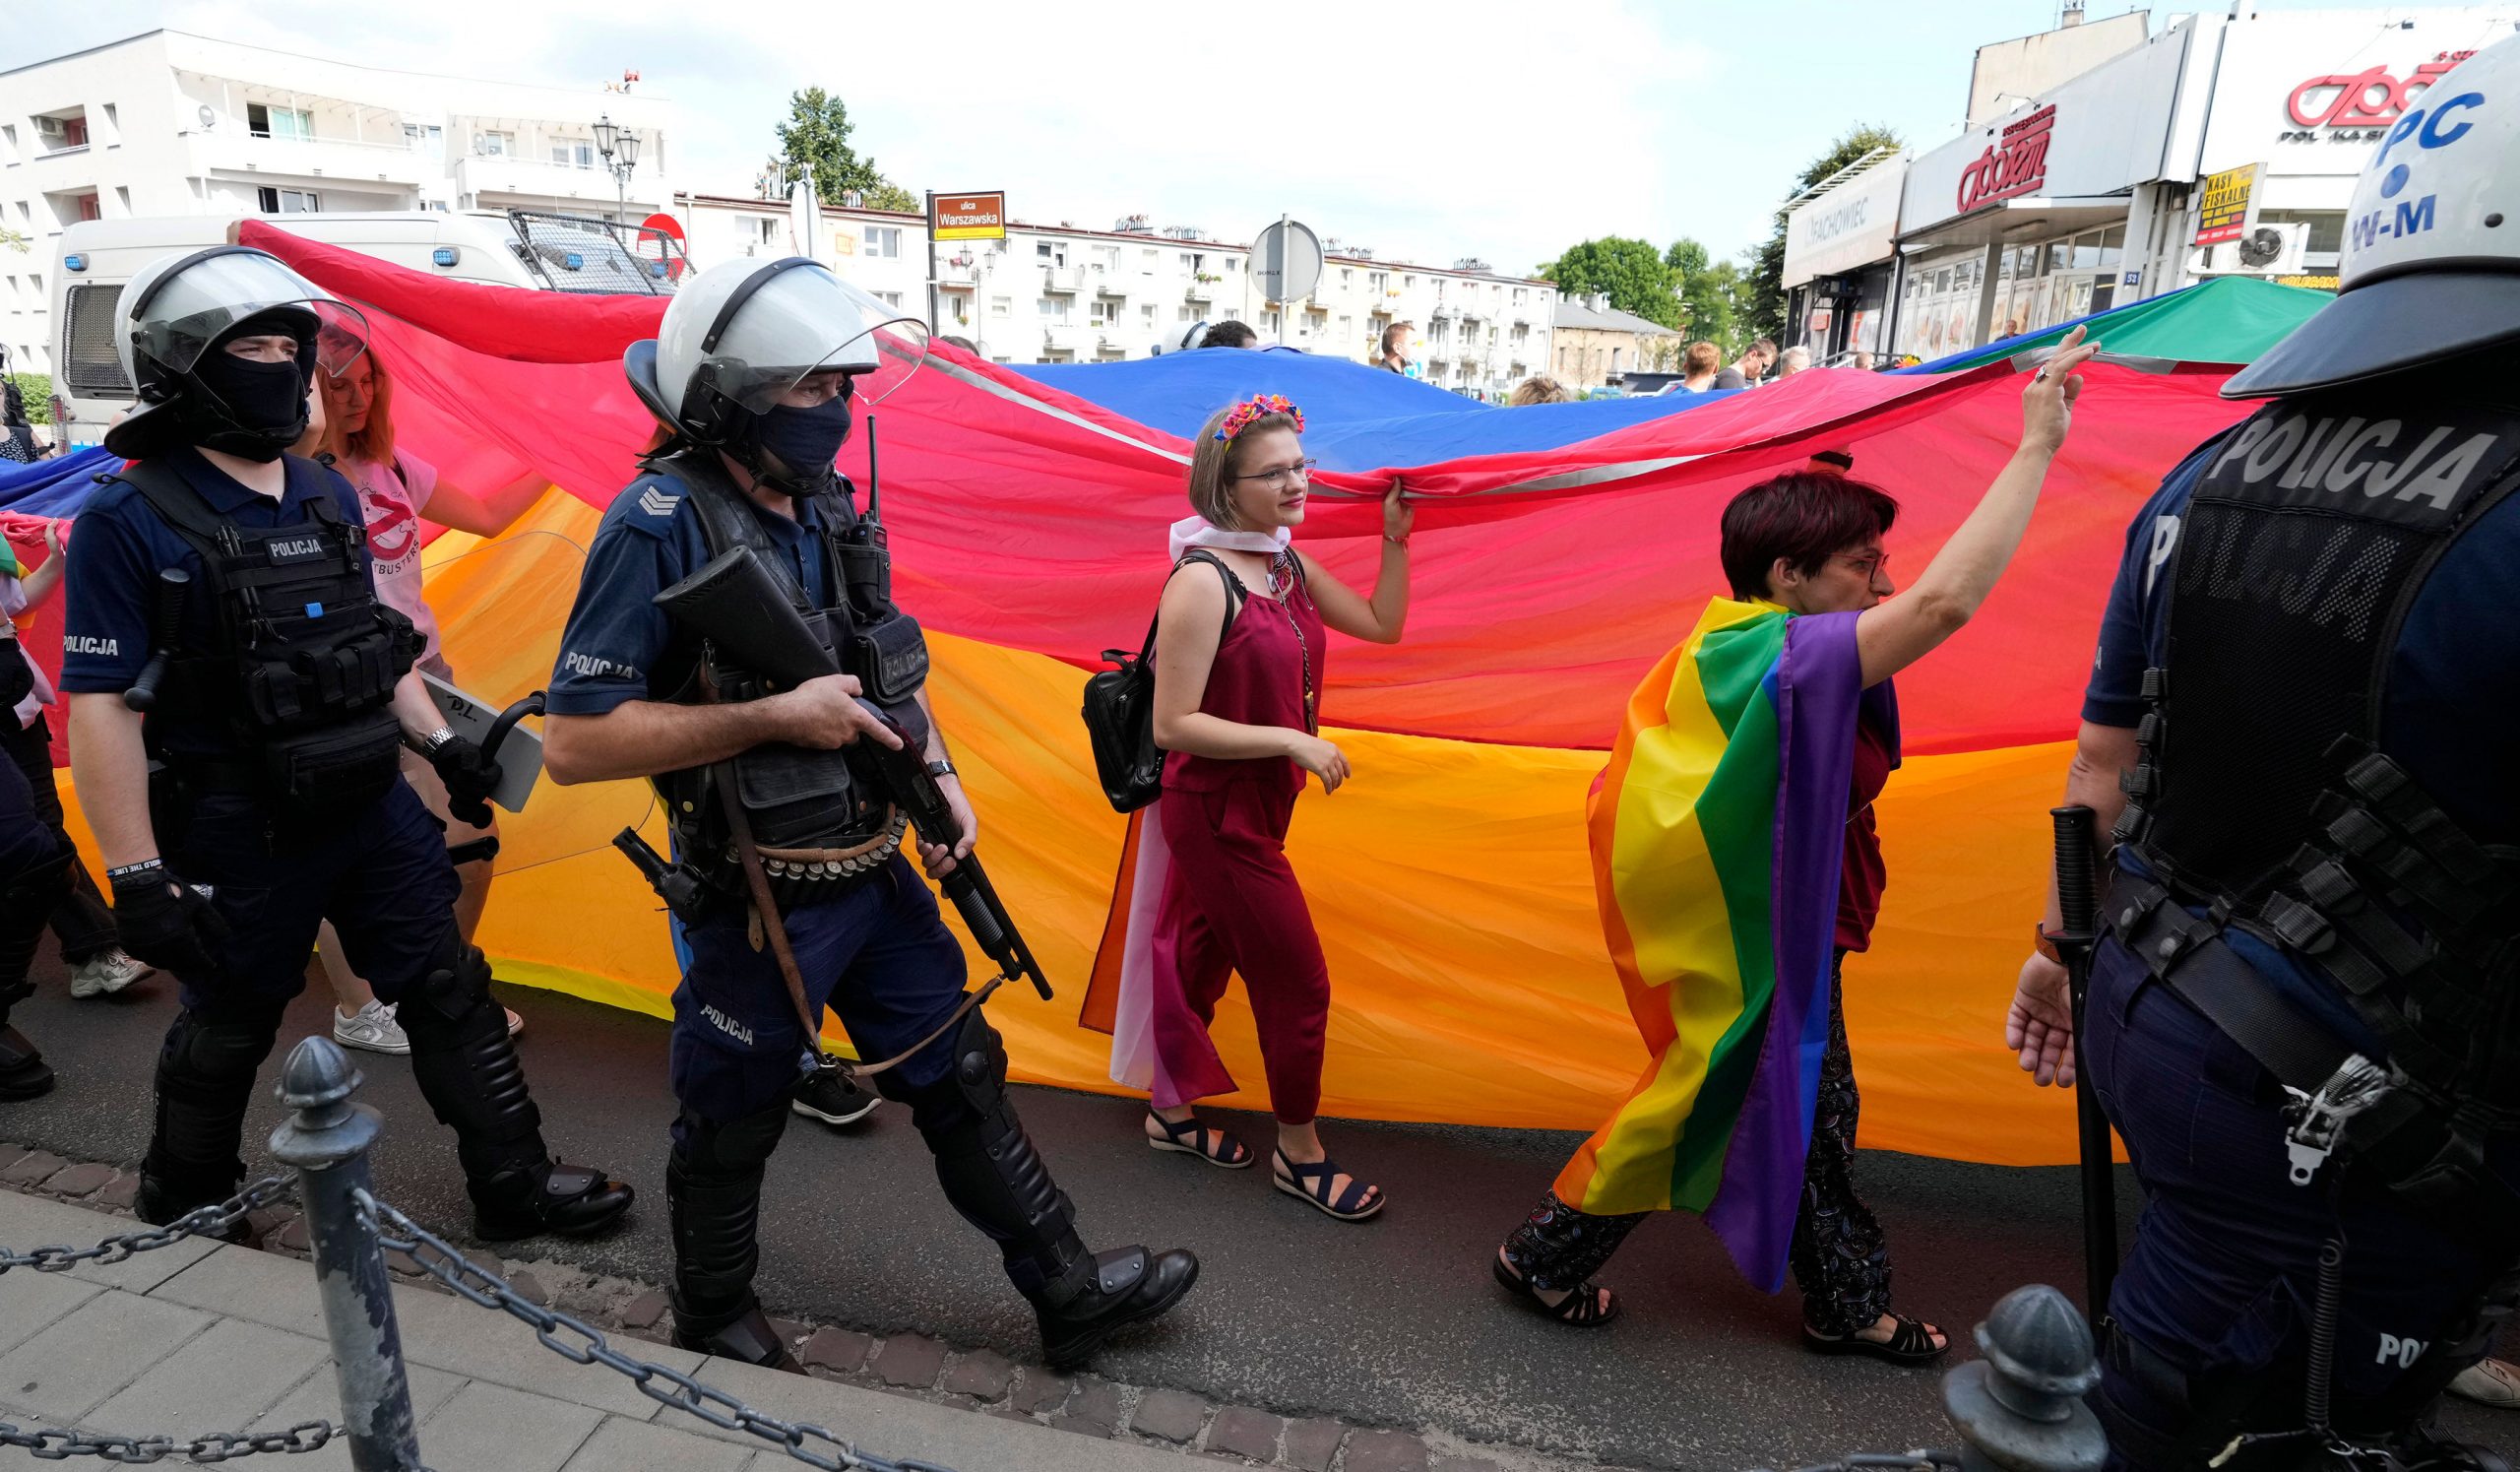 LGBT Marches held in Poland amid opposition from far-right groups